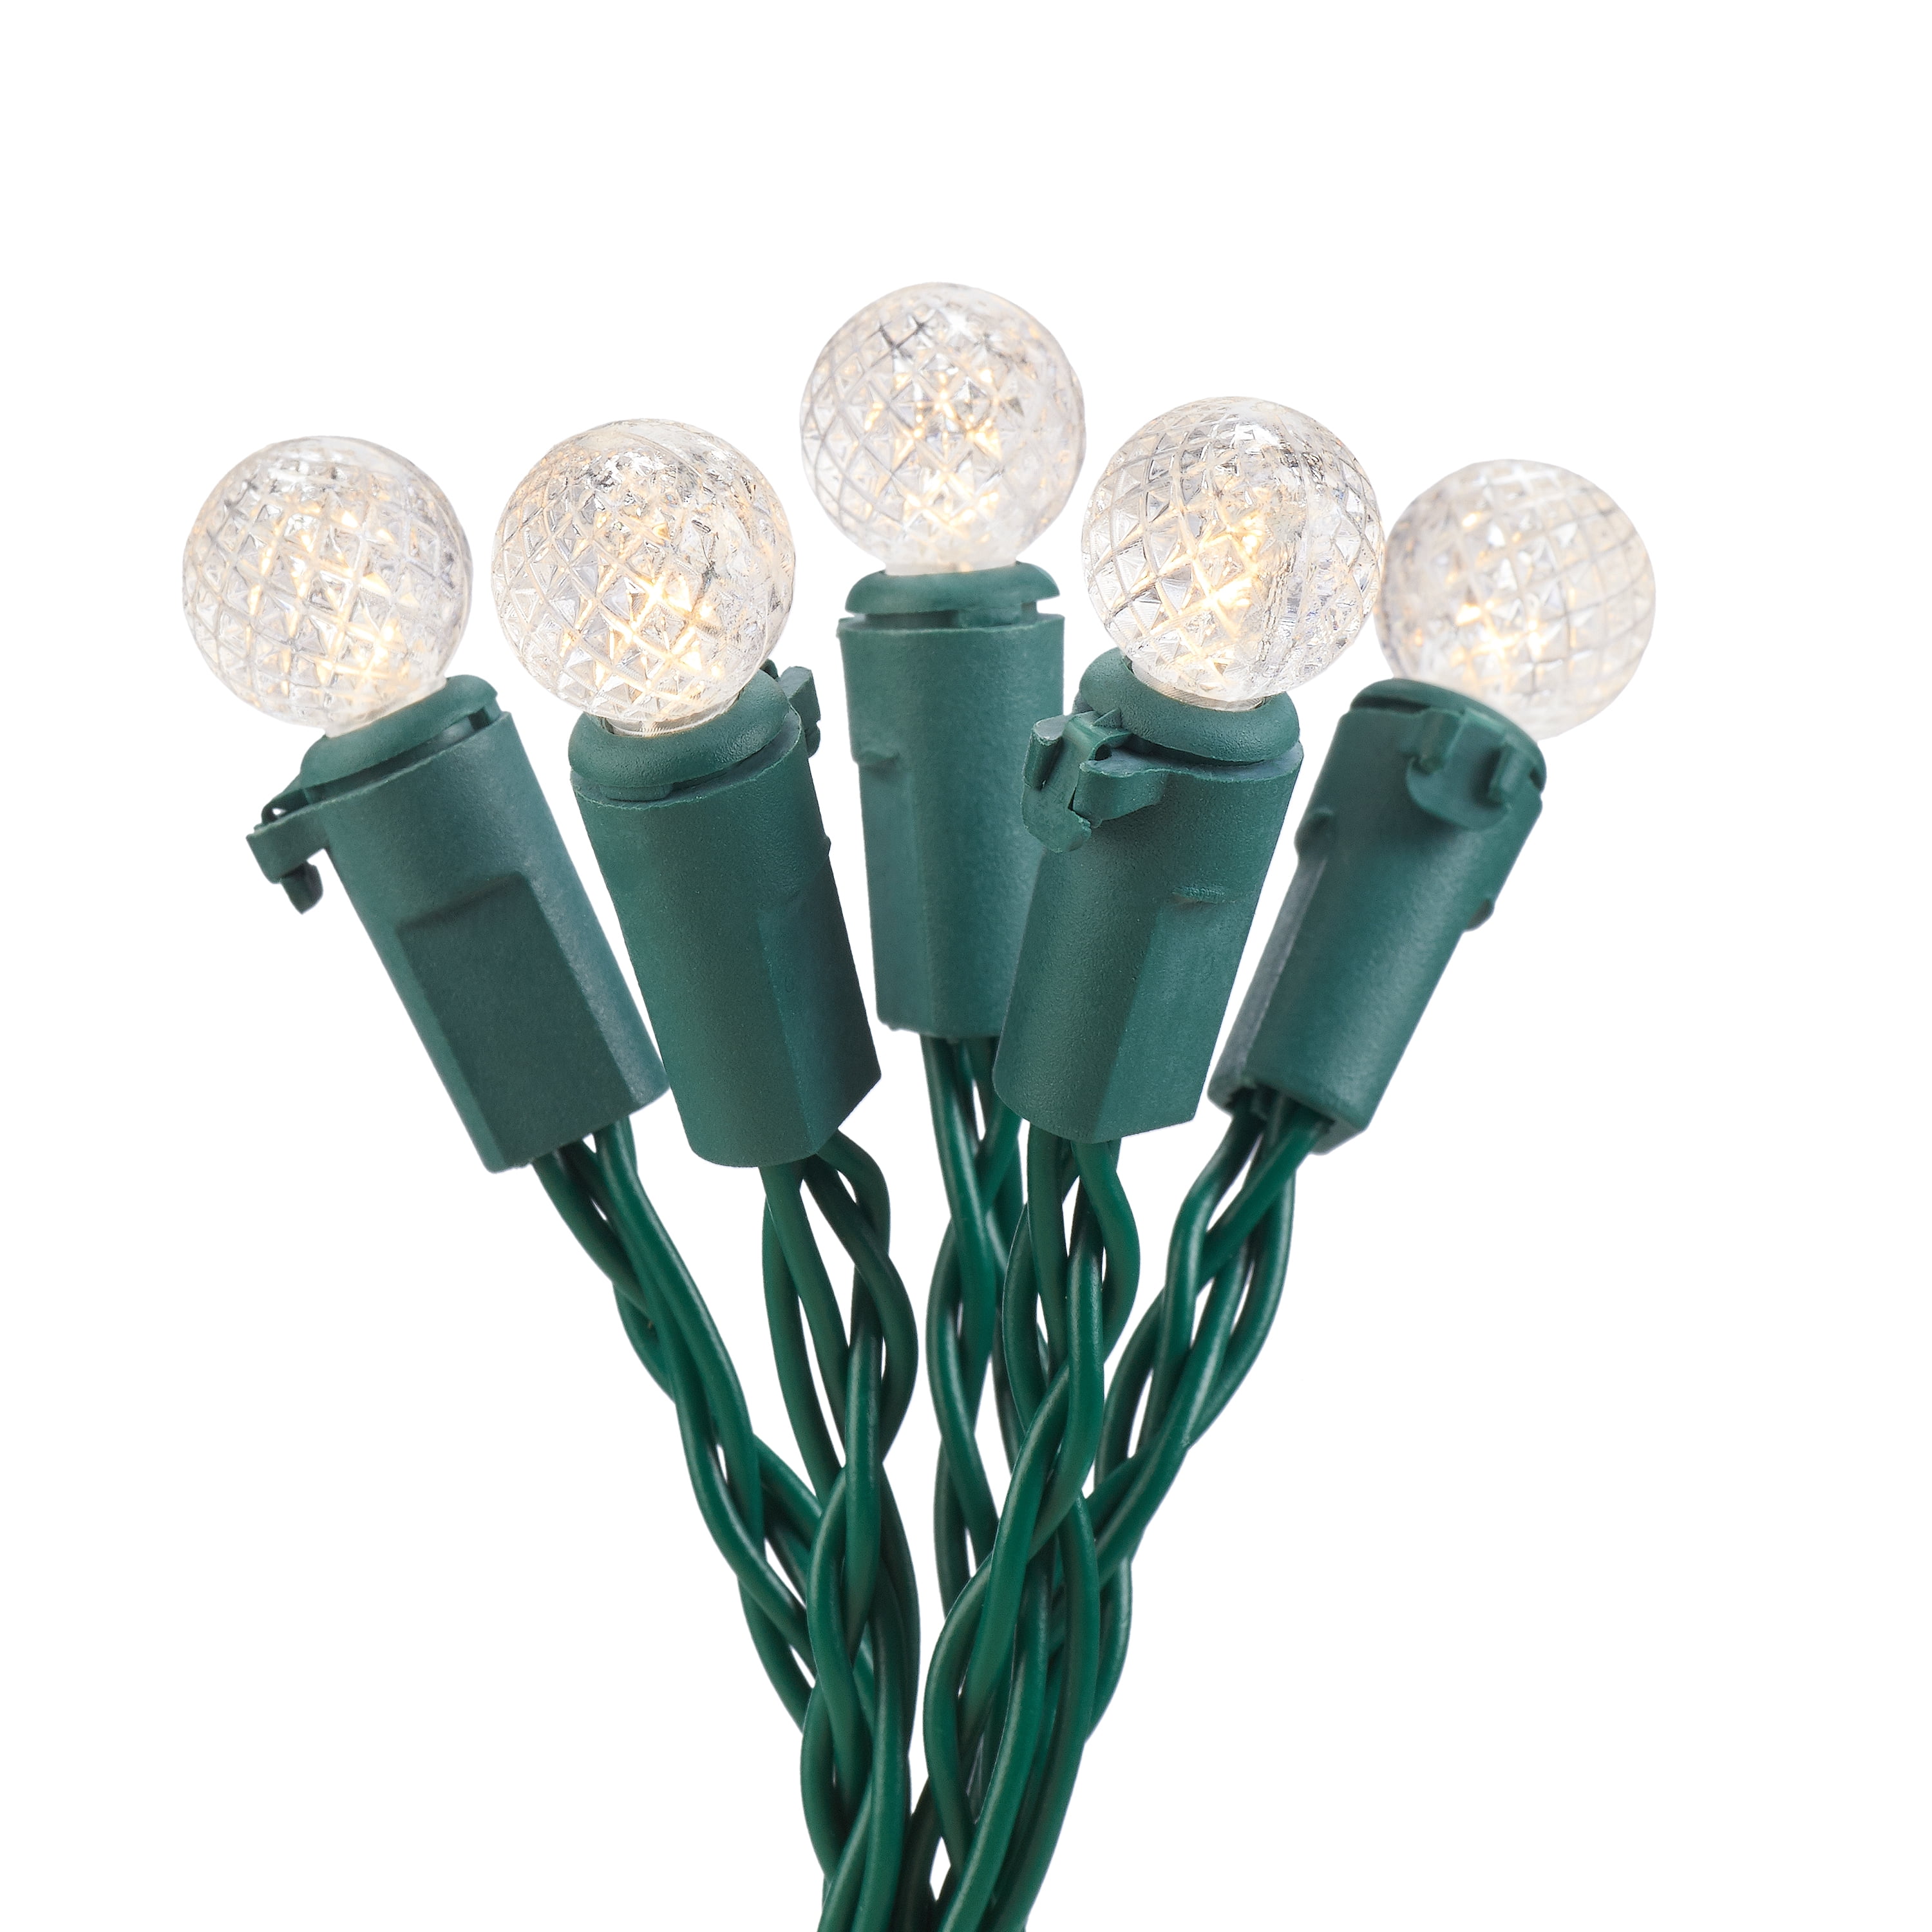 HoliDecor christmas lights - battery operated string lights 50